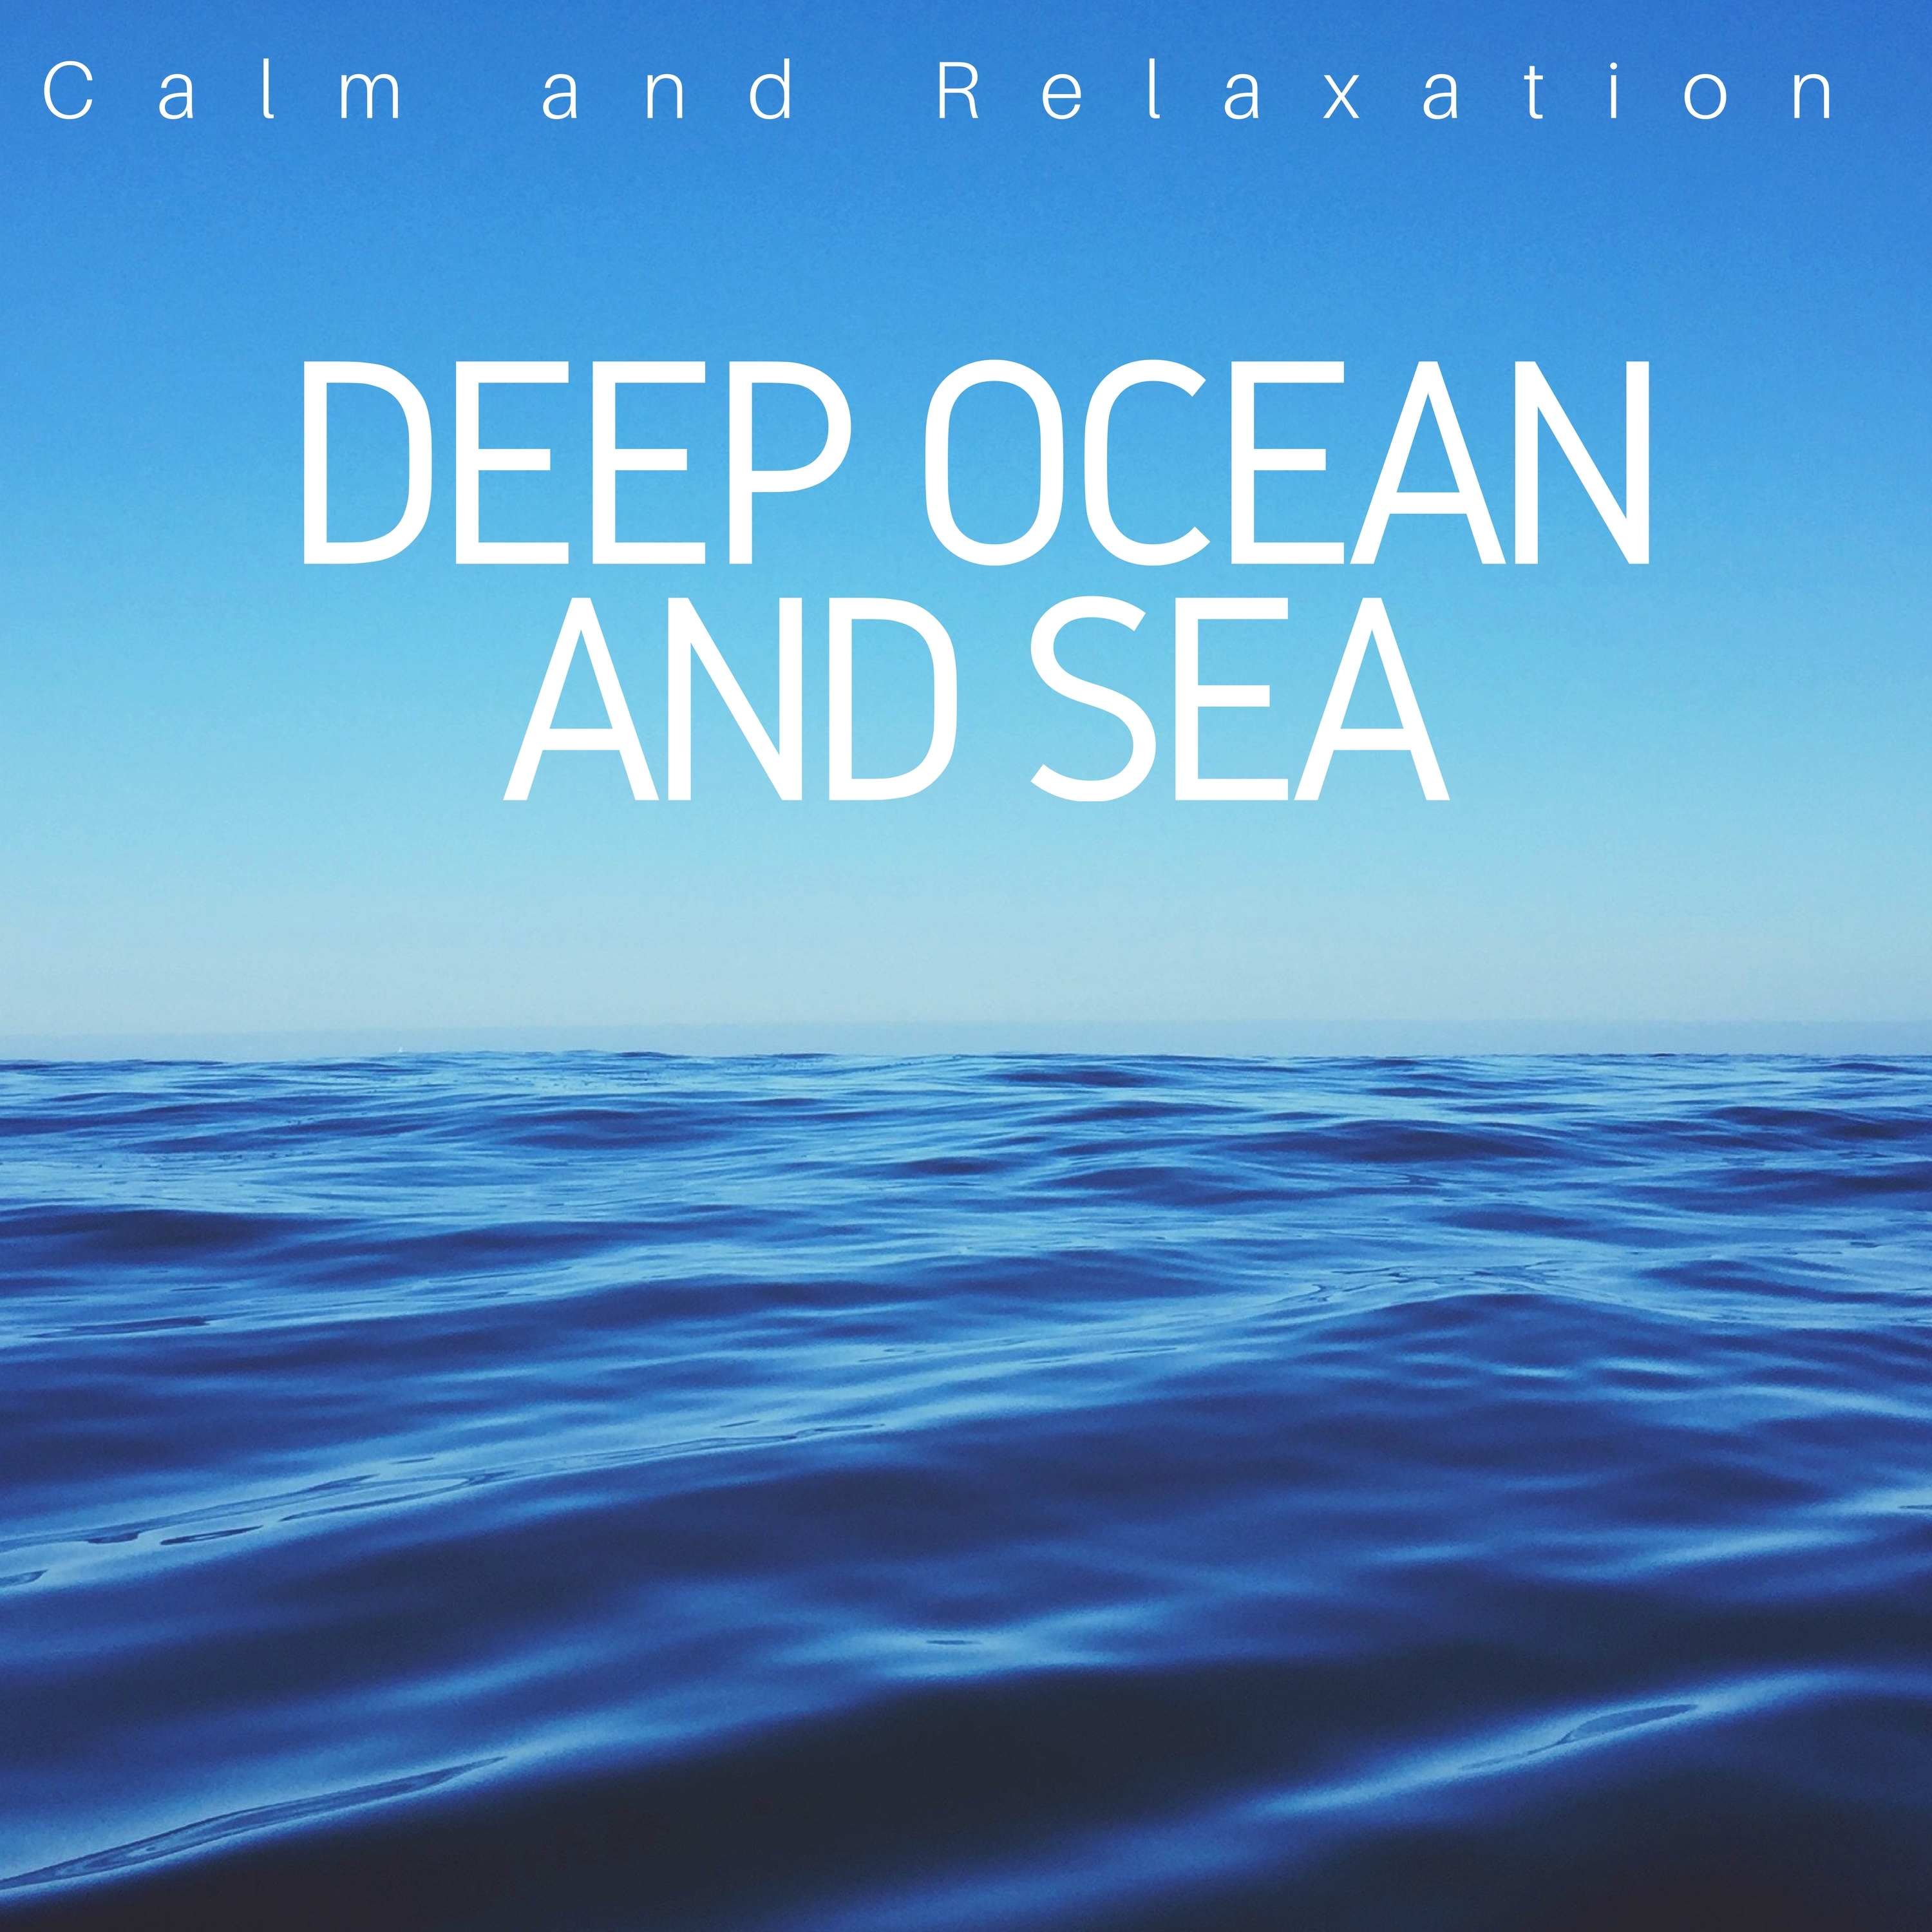 Calm and Relaxation